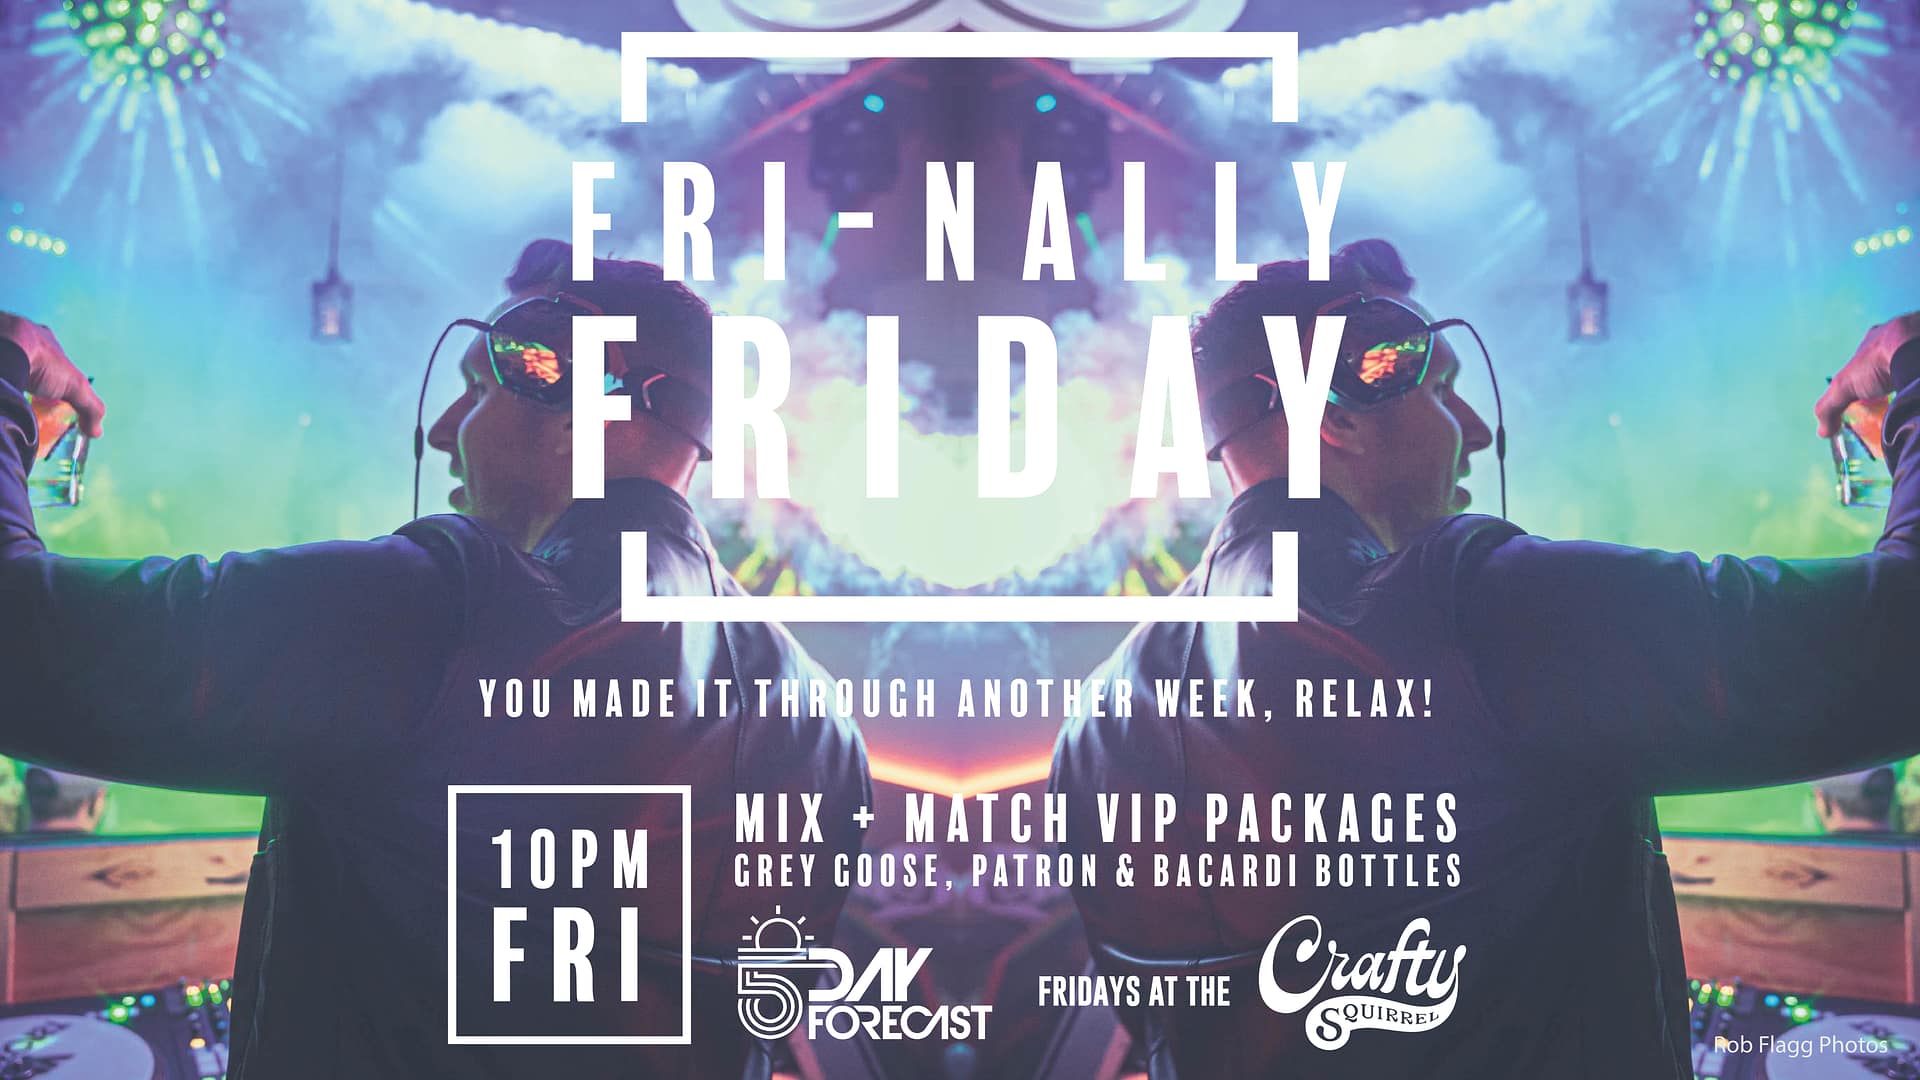 Frinally Friday at Crafty Squirrel in St. Petersburg, Florida with DJ 5 Day Forecast